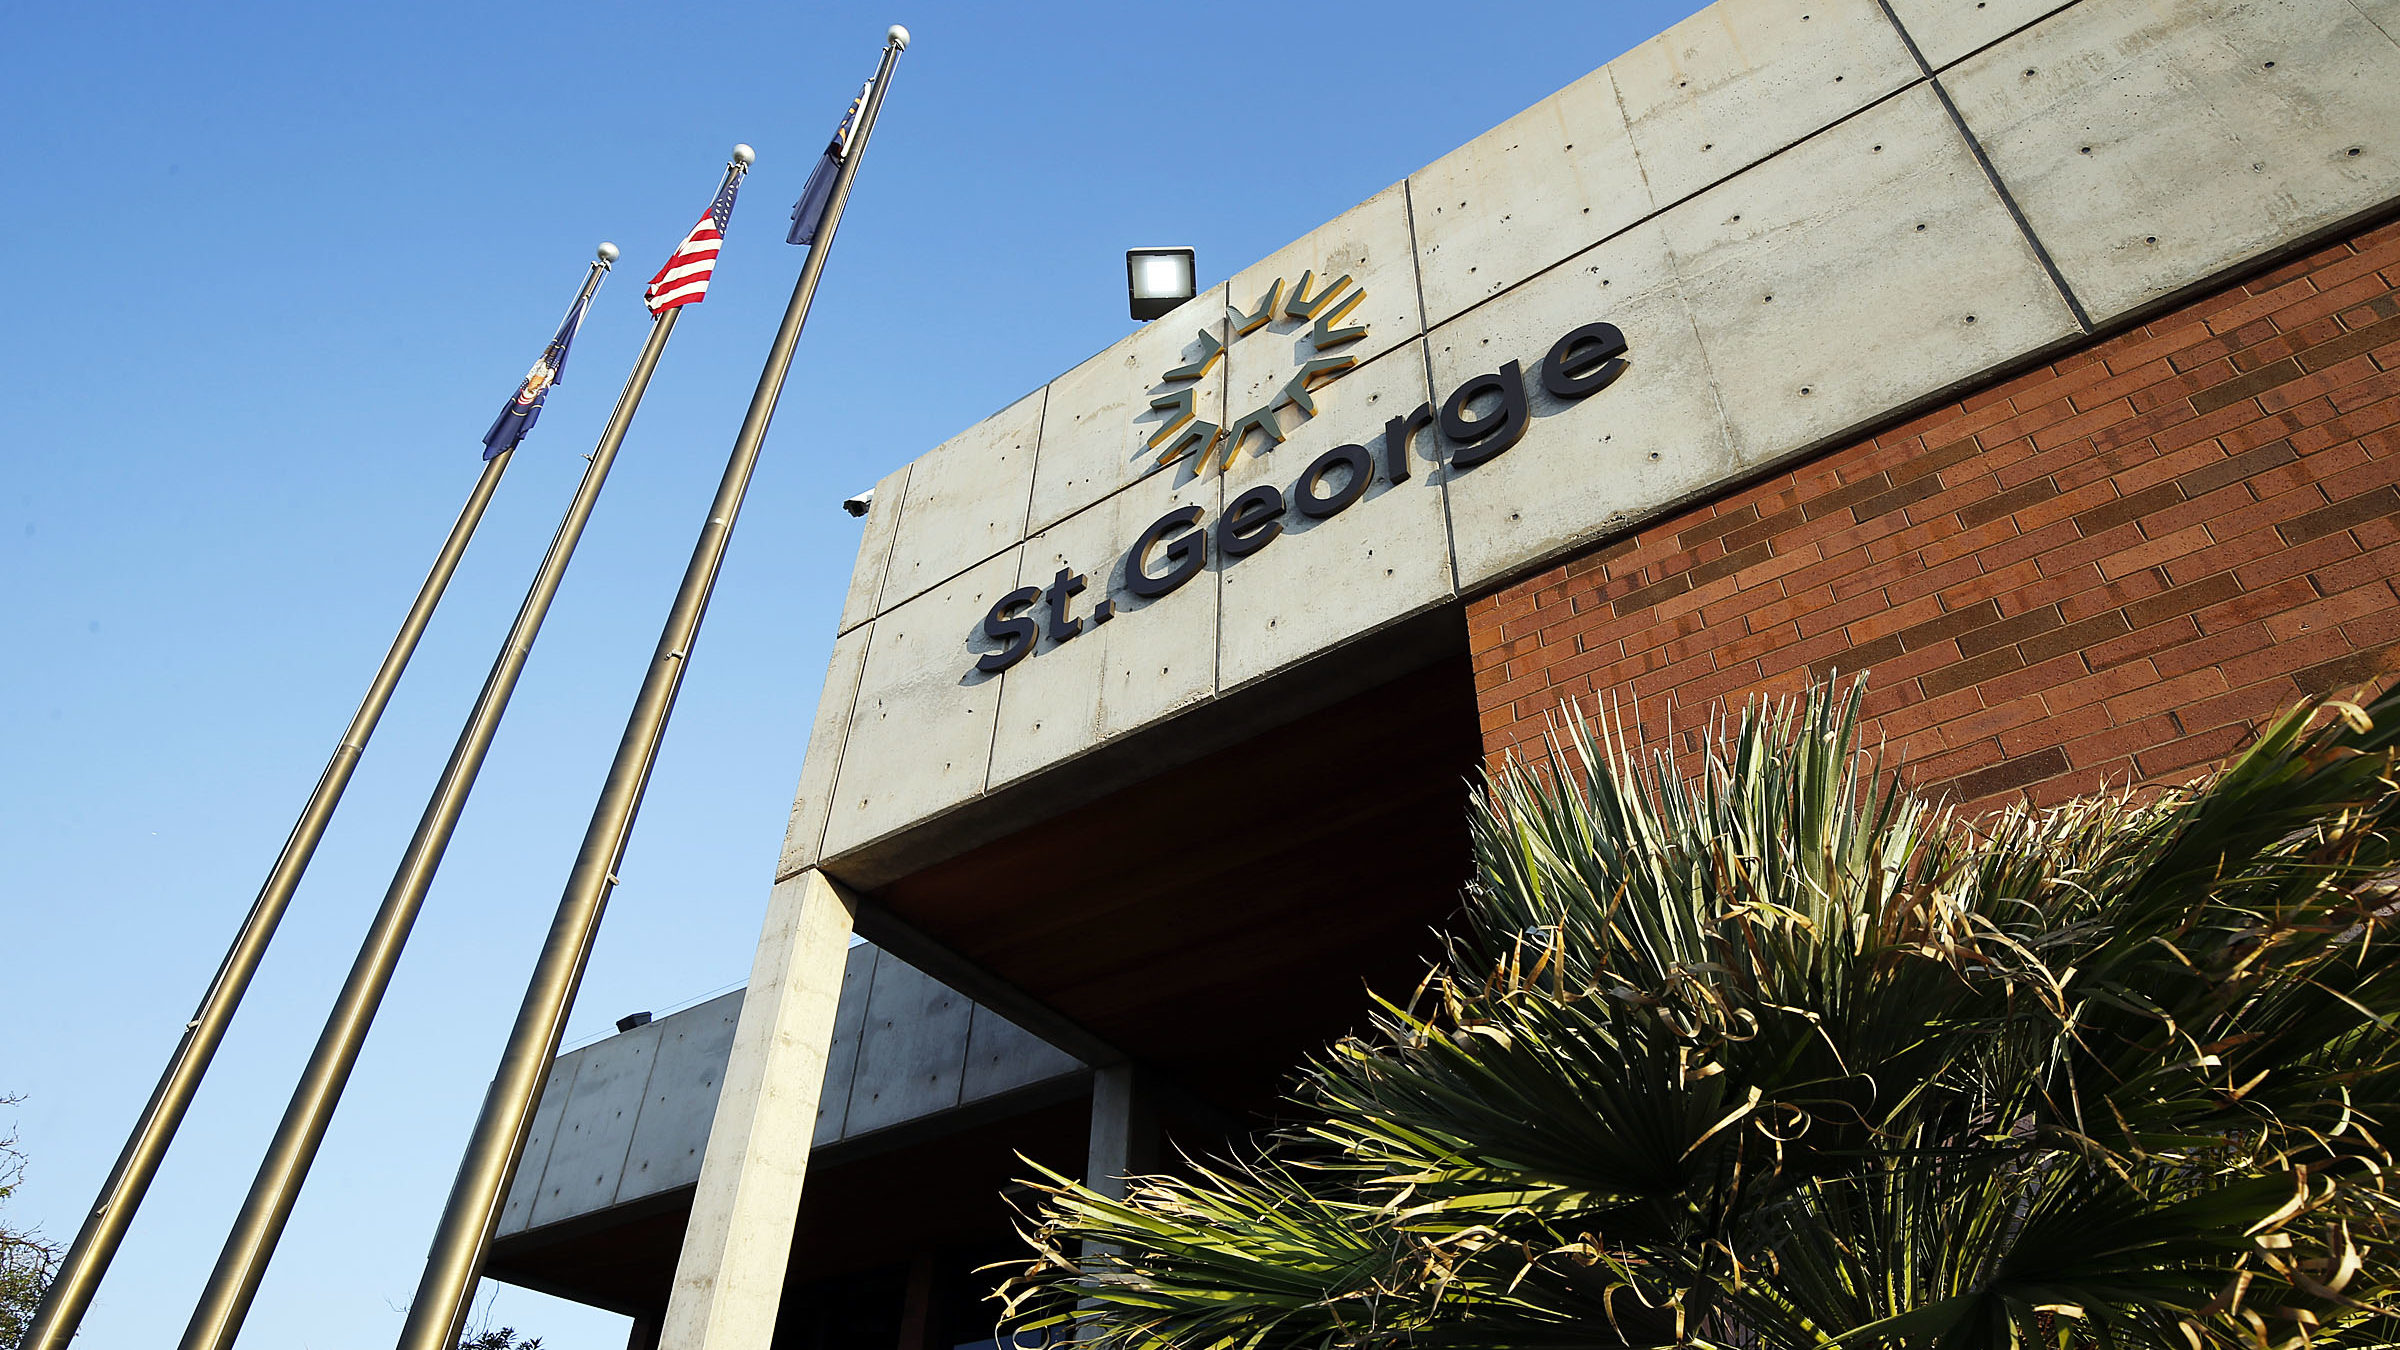 St. George City Hall is pictured on Sunday, Oct. 11, 2020. Photo credit: Ravell Hall/Deseret News...